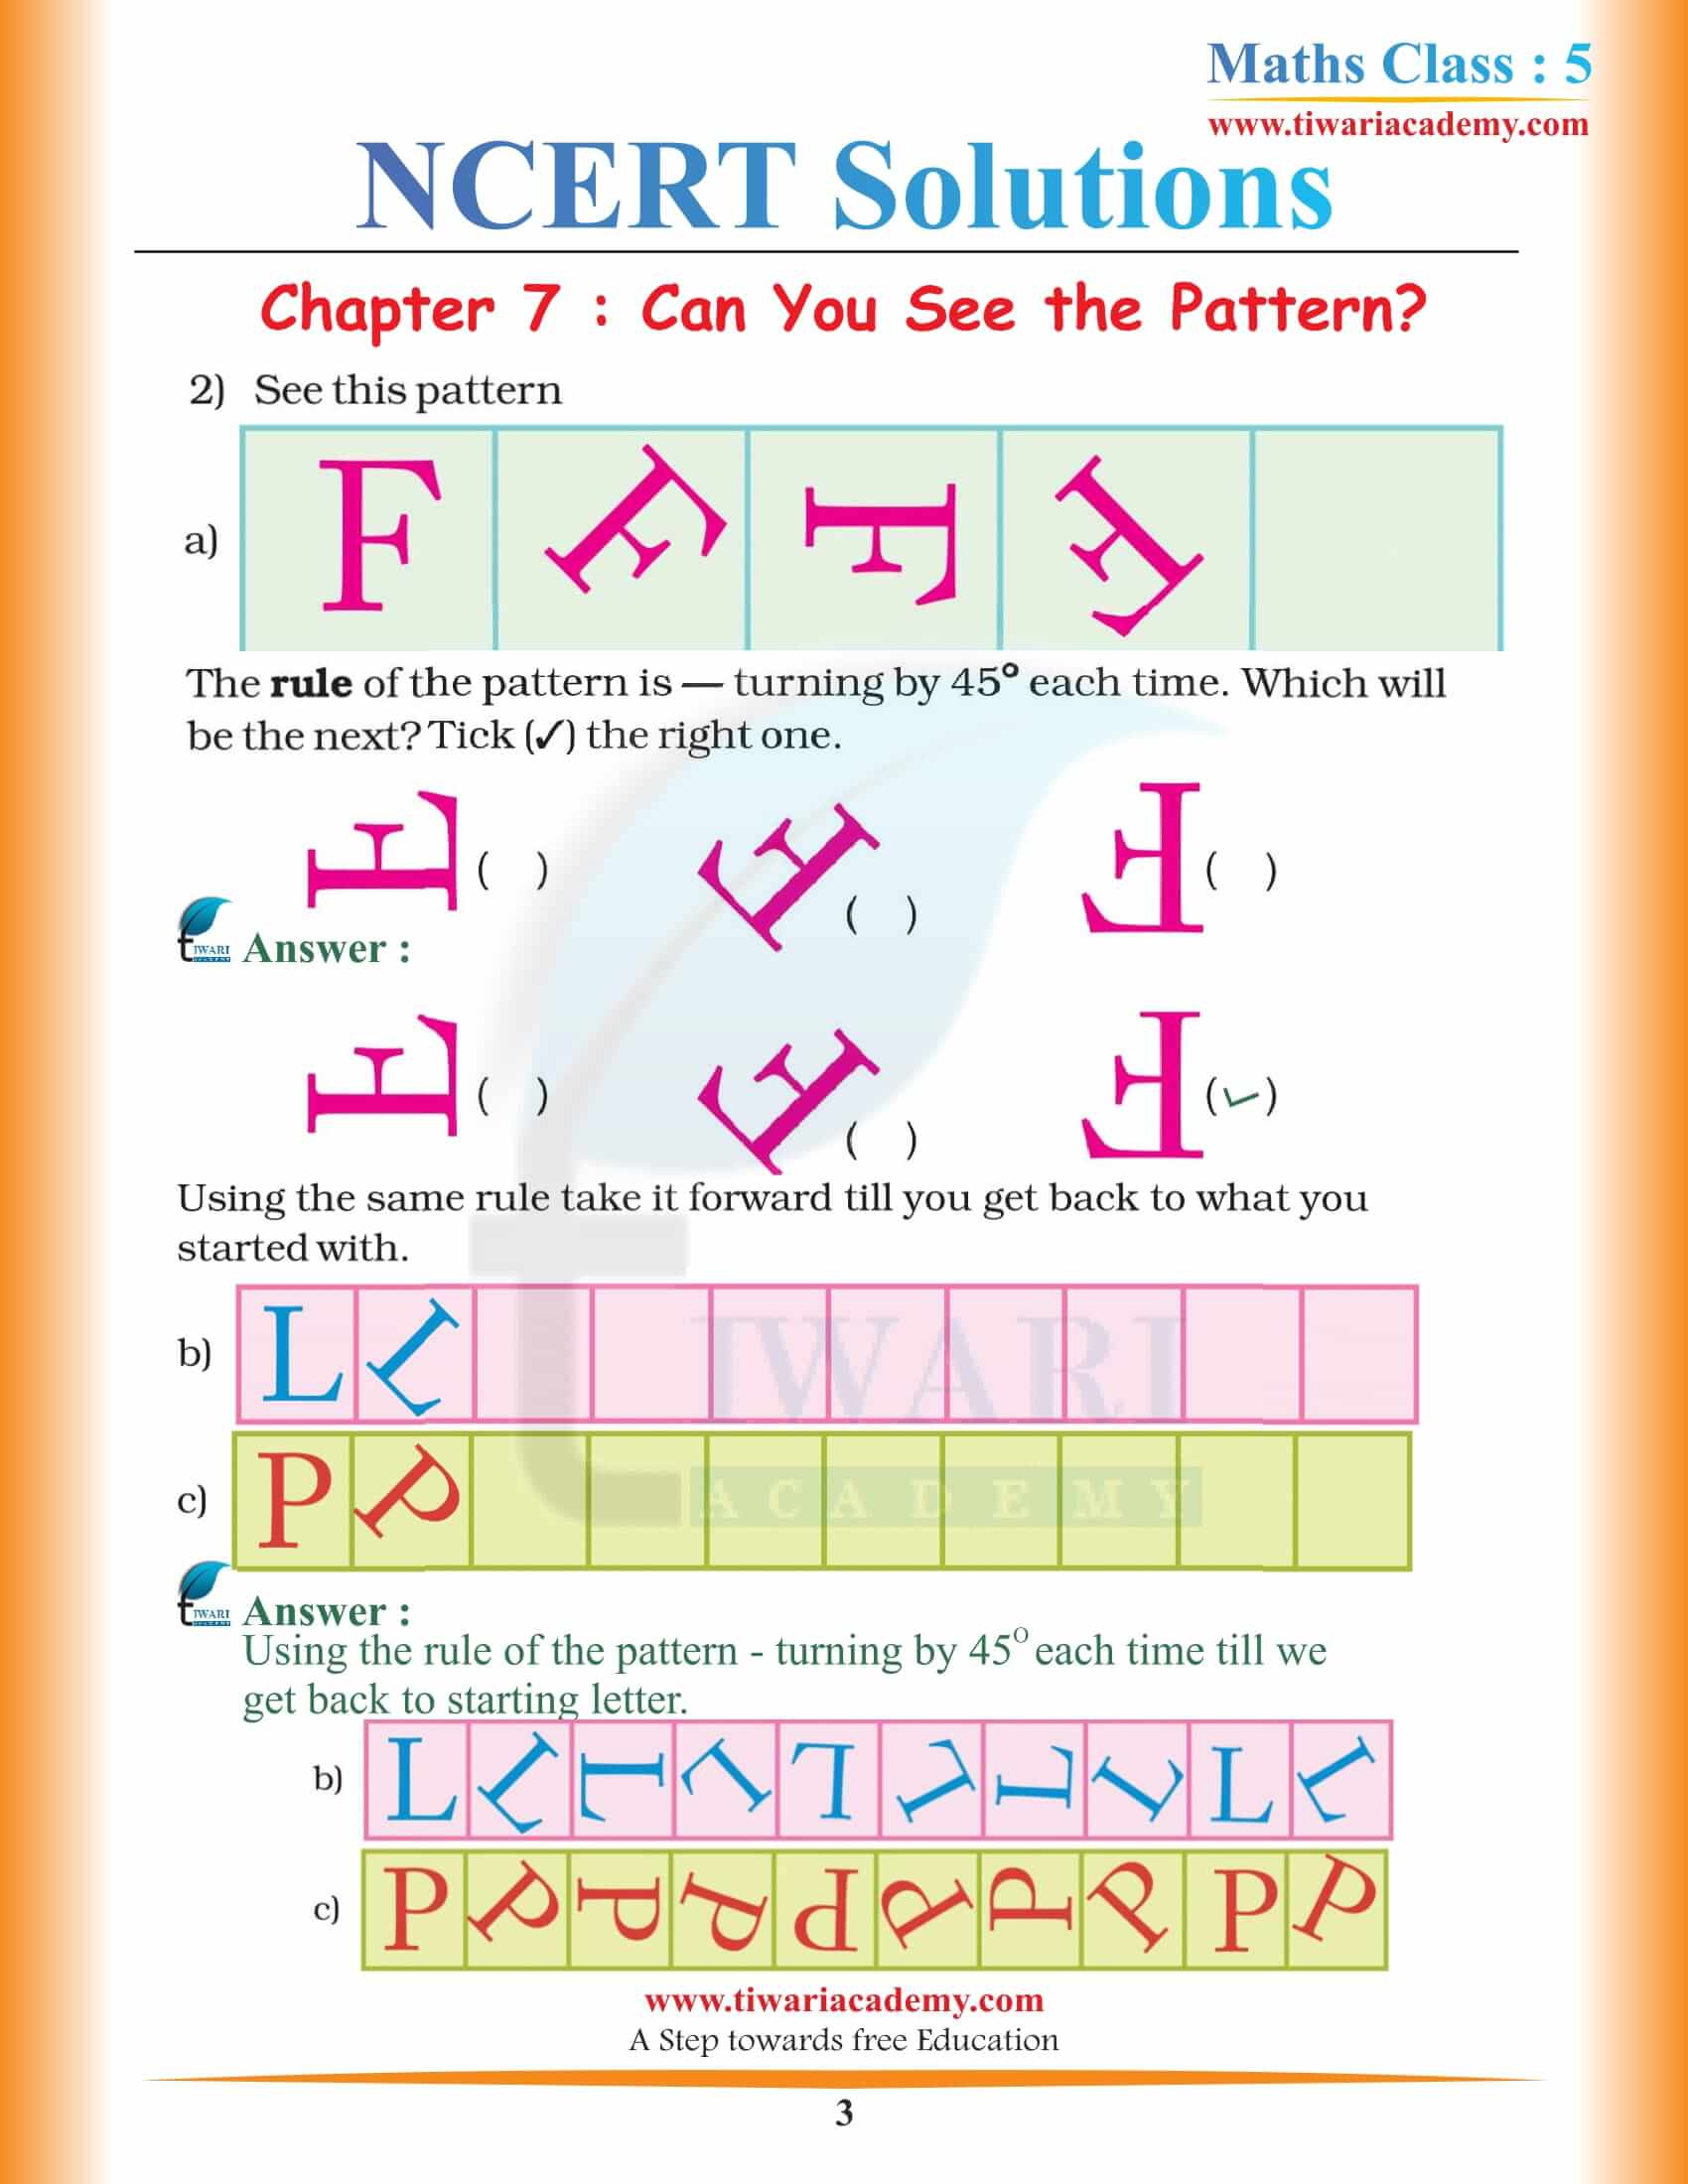 NCERT Solutions for Class 5 Maths Chapter 7 in English Medium